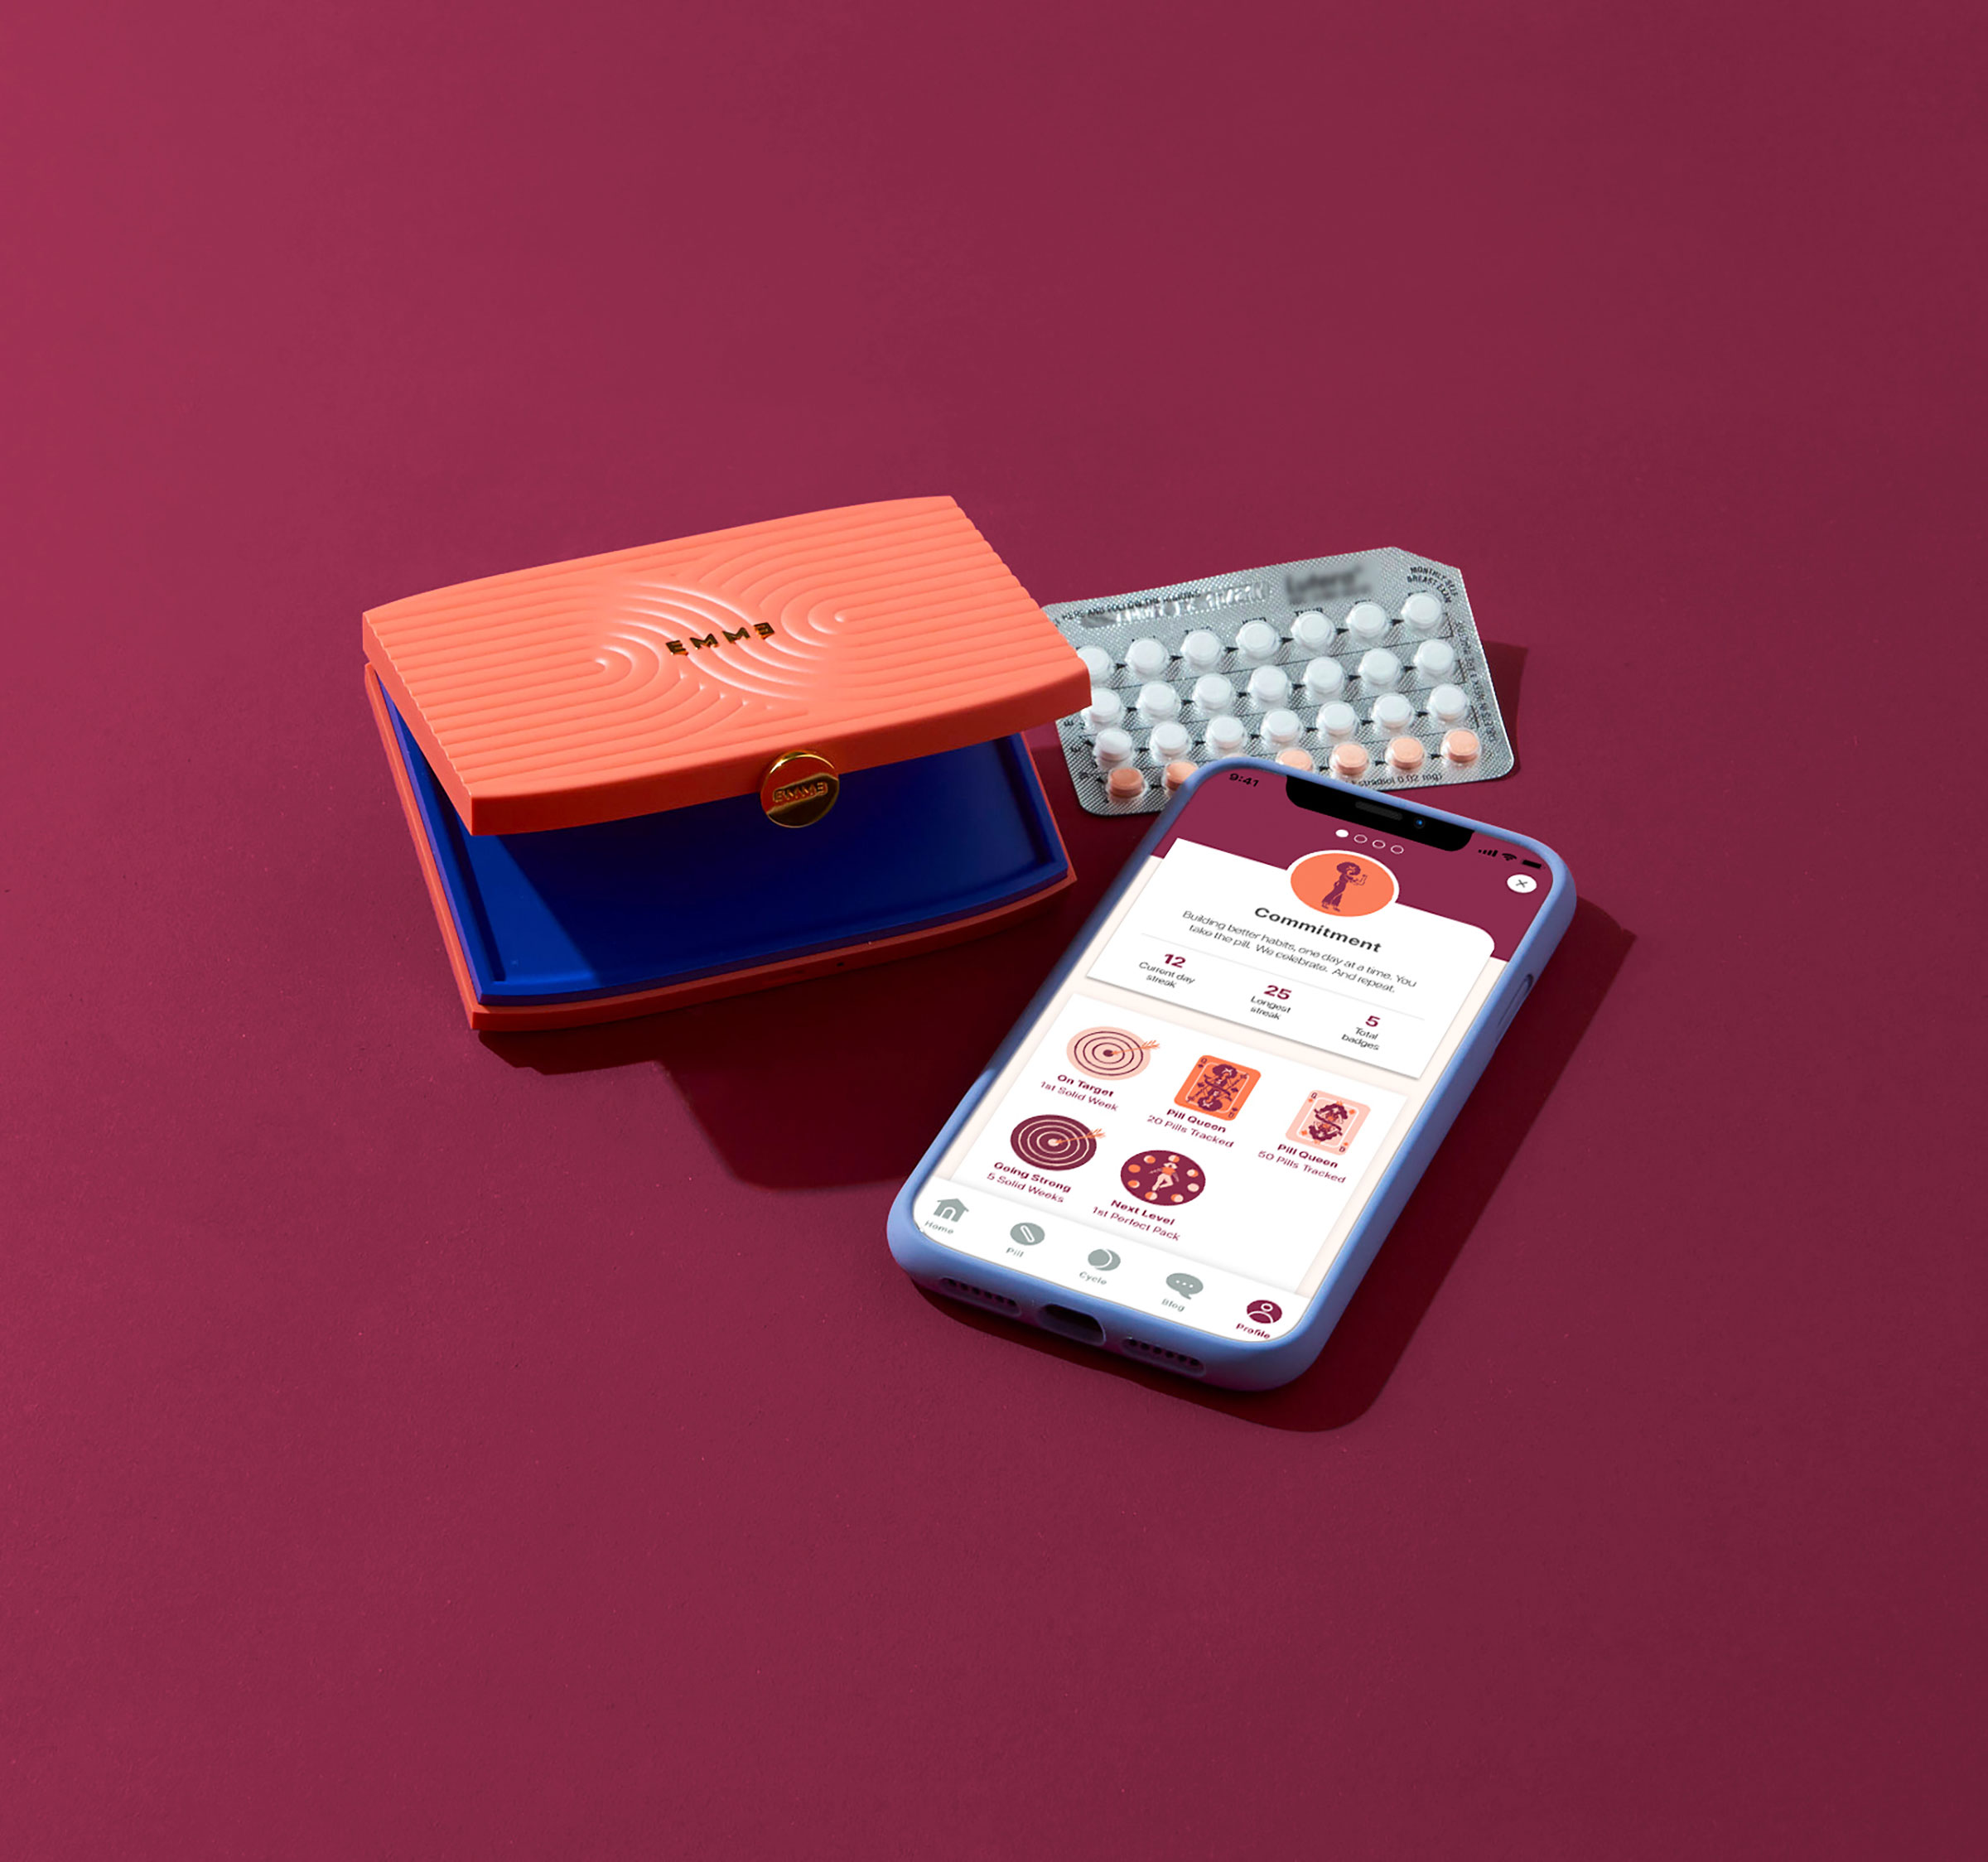 Best Inventions 2021: Emme Smart Birth Control System